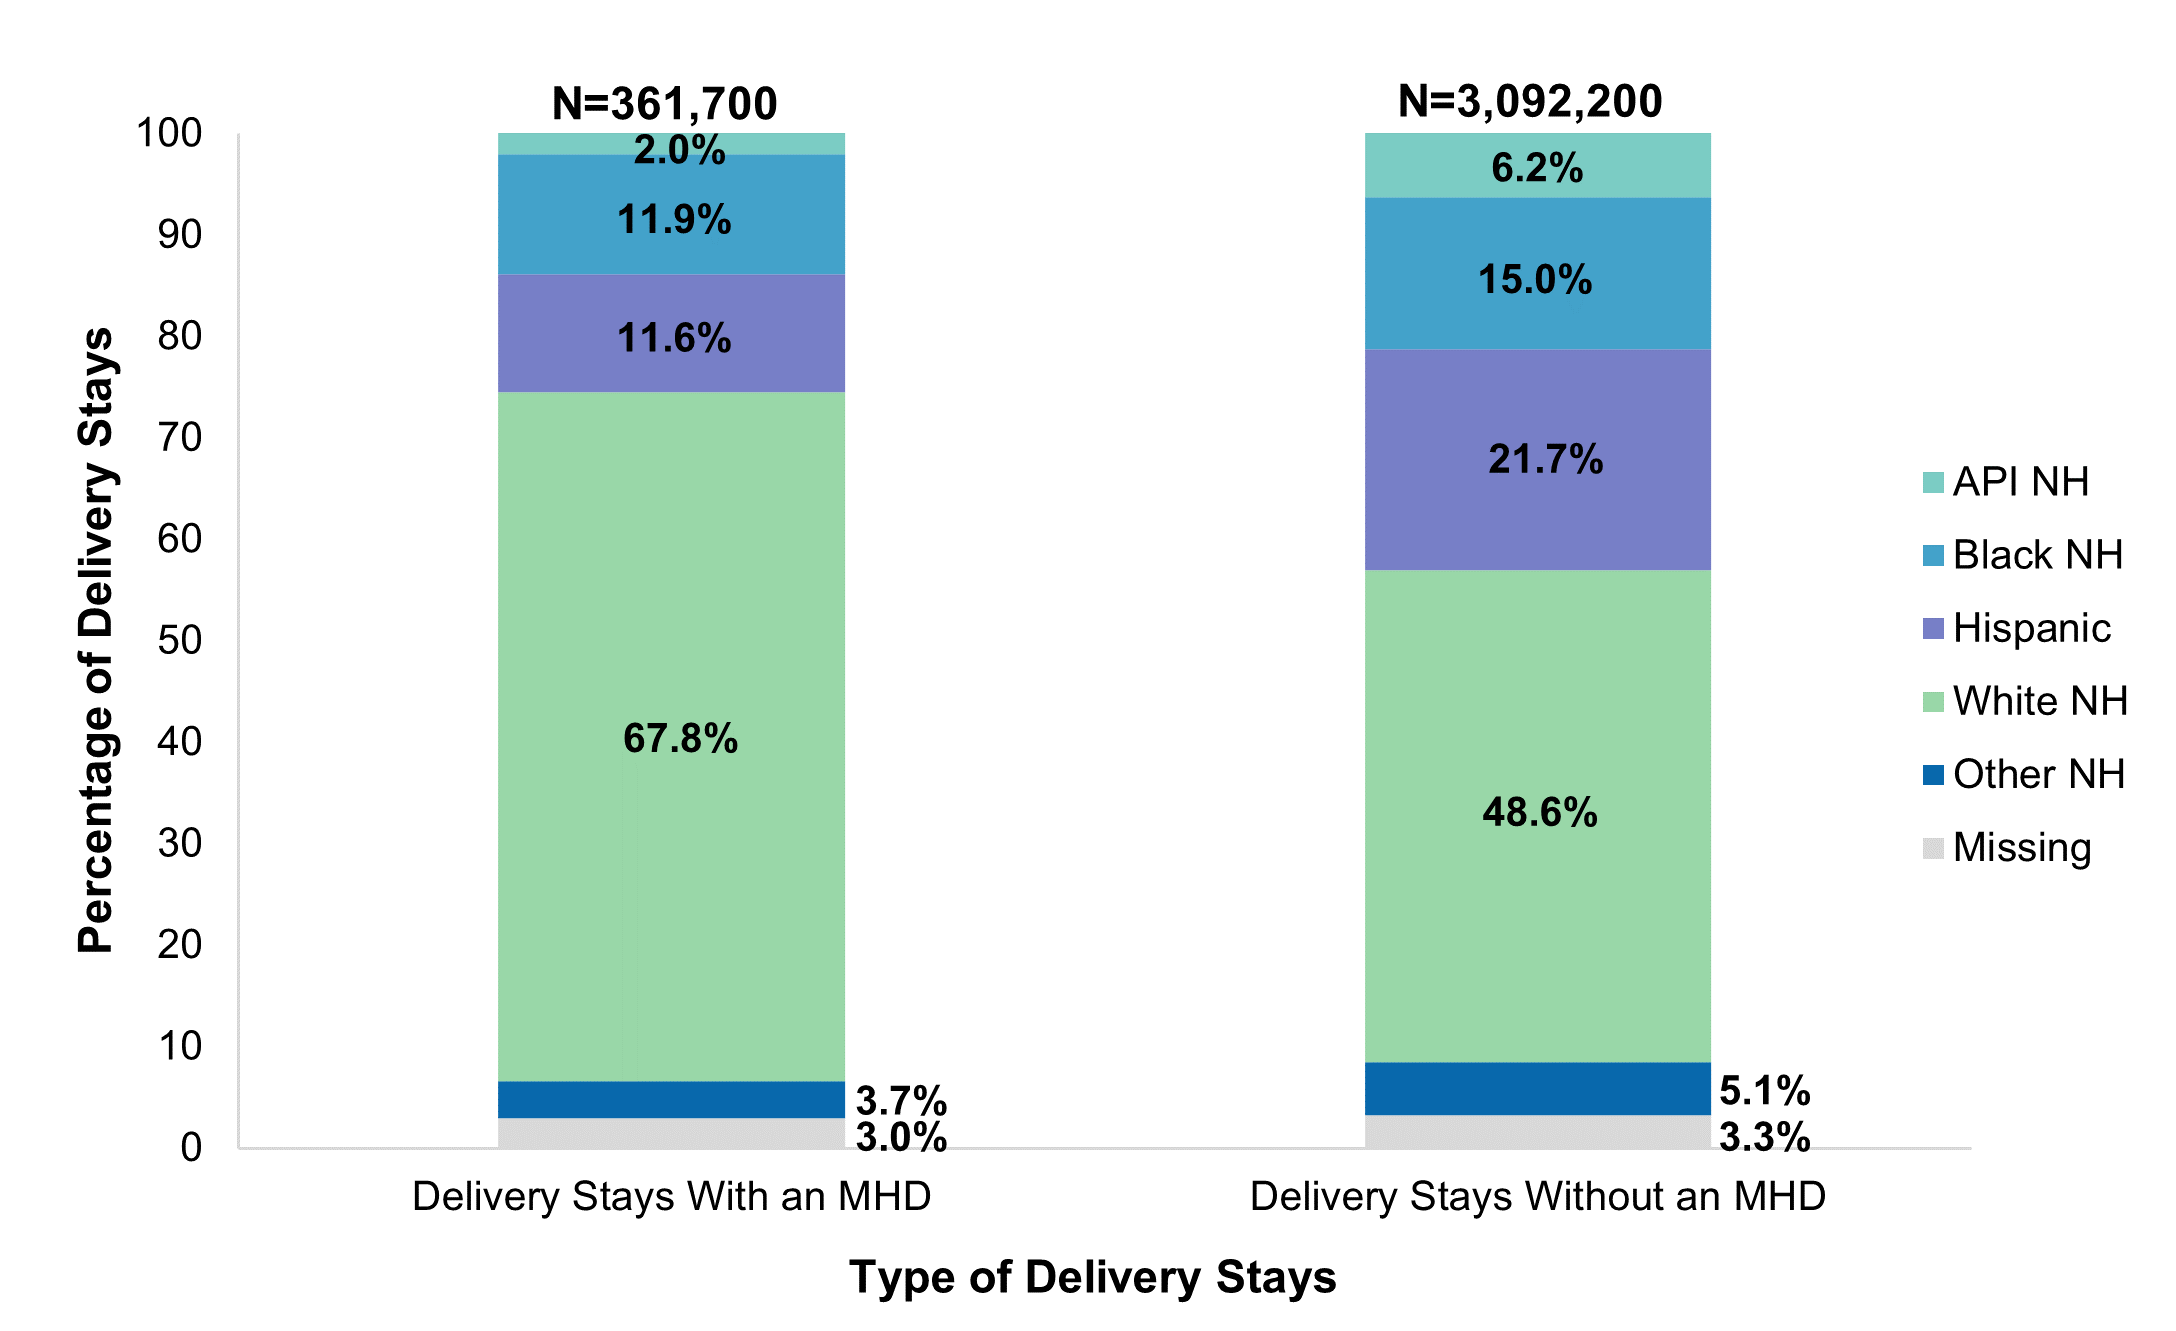 Bar chart showing the distribution of delivery stays with and without a mental health disorder diagnosis by patient race and ethnicity in 2020. Delivery stays with a mental health disorder (N=361,700): Asian/Pacific Islander non-Hispanic (NH), 2.0%; Black NH, 11.9%; Hispanic, 11.6%; White NH, 67.8%; other NH, 3.7%; missing, 3.0%. Delivery stays without a mental health disorder (N=3,092,200): Asian/Pacific Islander NH, 6.2%; Black NH, 15.0%; Hispanic, 21.7%; White NH, 48.6%; other NH, 5.1%; missing, 3.3%.